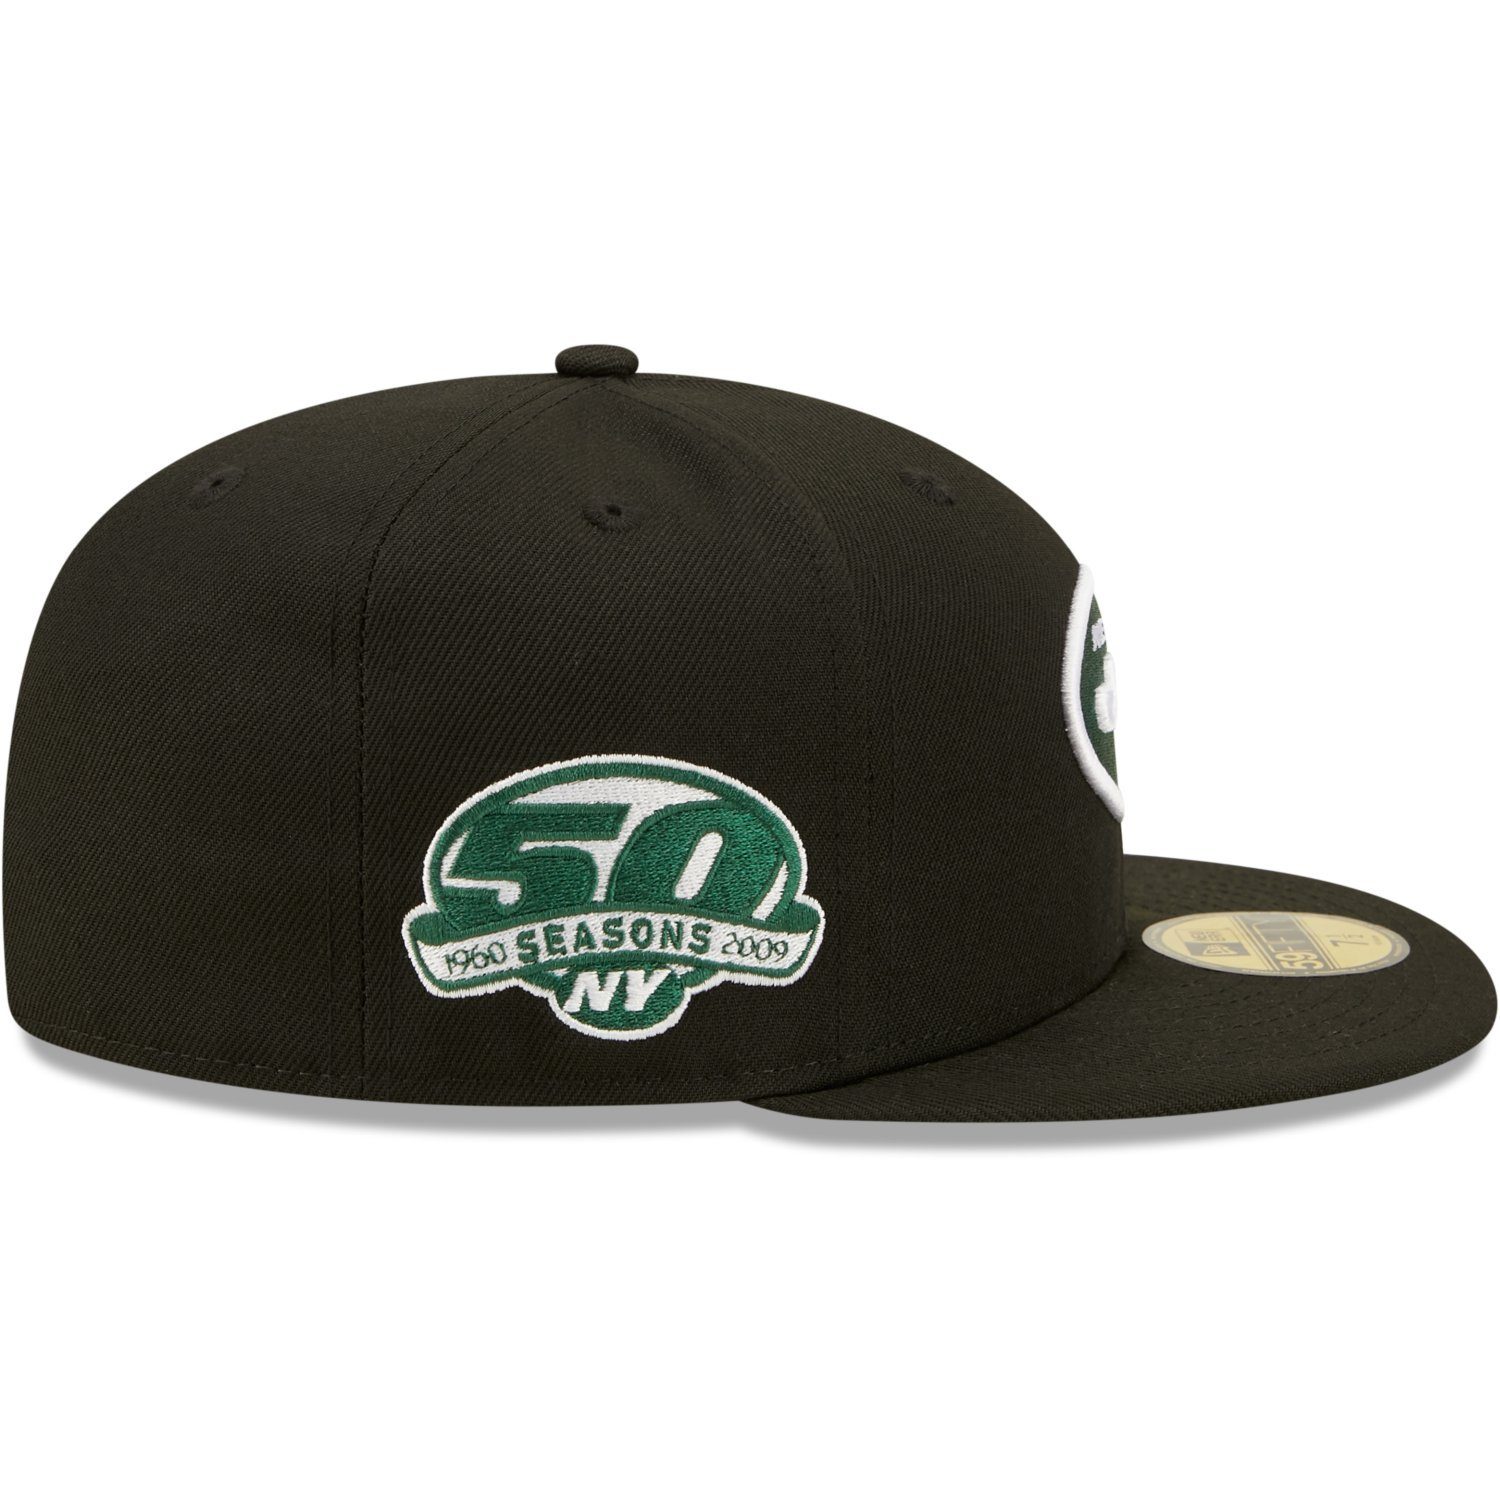 59Fifty Era 50 Seasons New Fitted New York Cap Jets